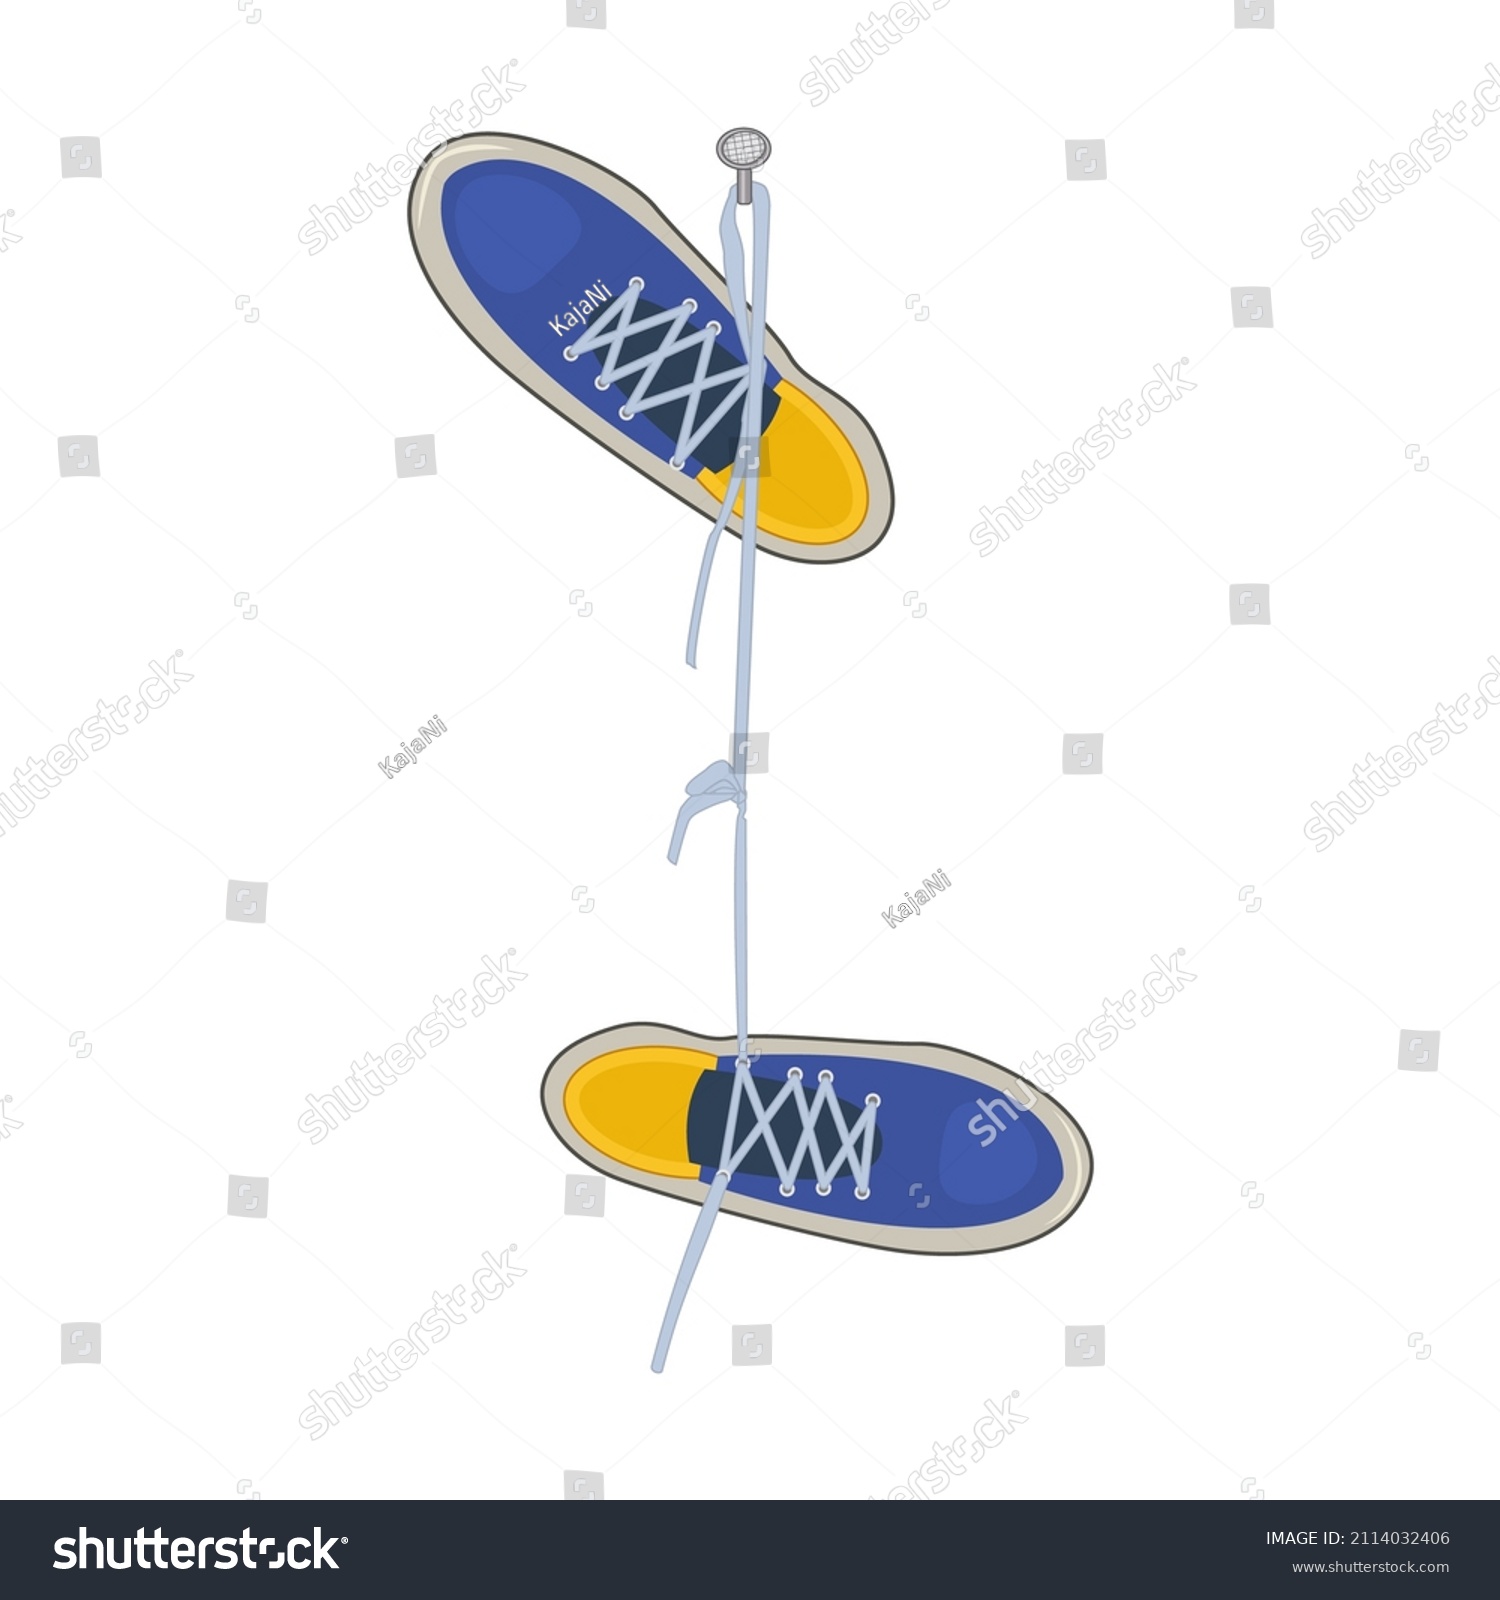 SVG of Shoes hanging on nail isolated on white background. Pair of sports footwear hang on peg.Vintage blue sneakers hang on shoelace on spike.Sports and casual shoes.Shoe dangle on laces.Vector illustration svg